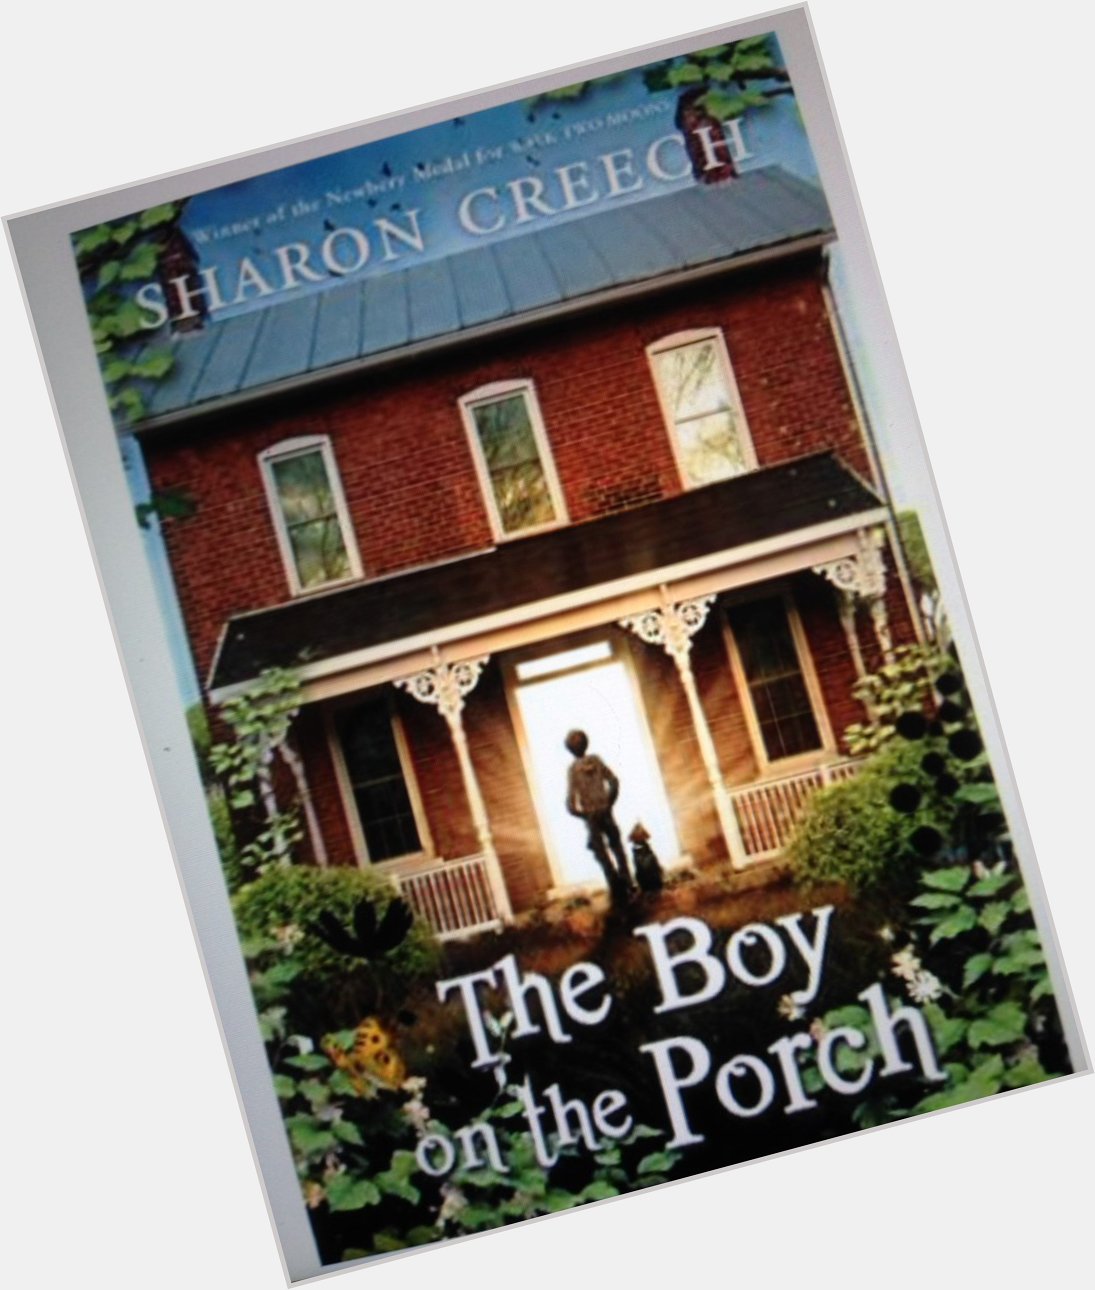 Happy Birthday Sharon Creech! Your readers will enjoy her novel about a very unexpected family! Charming & hopeful. 